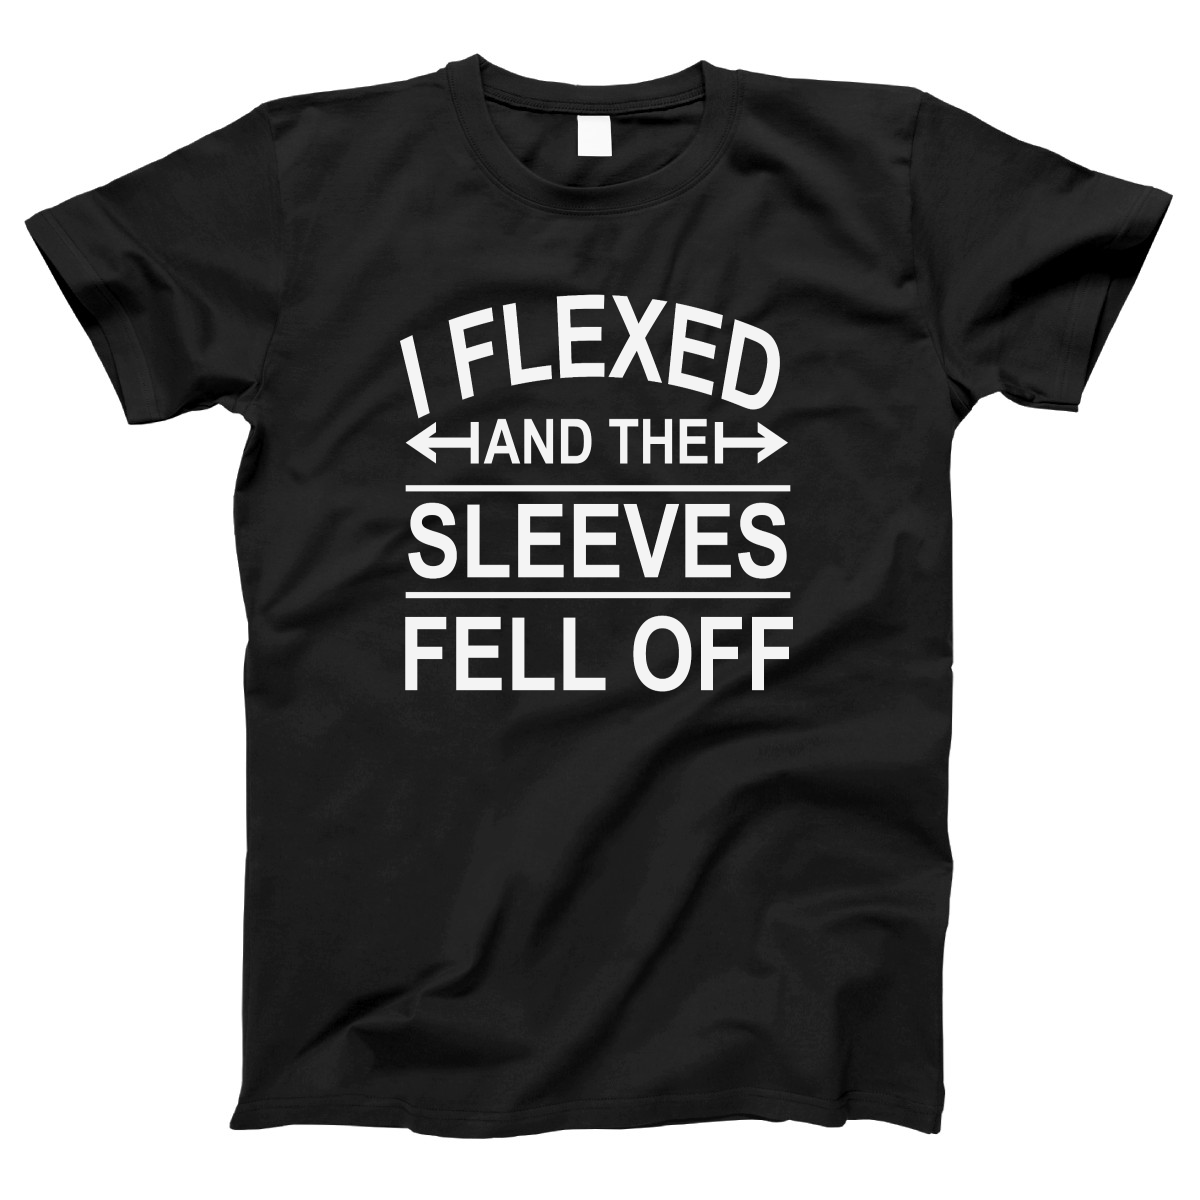 I Flexed and the sleeves fell off Women's T-shirt | Black